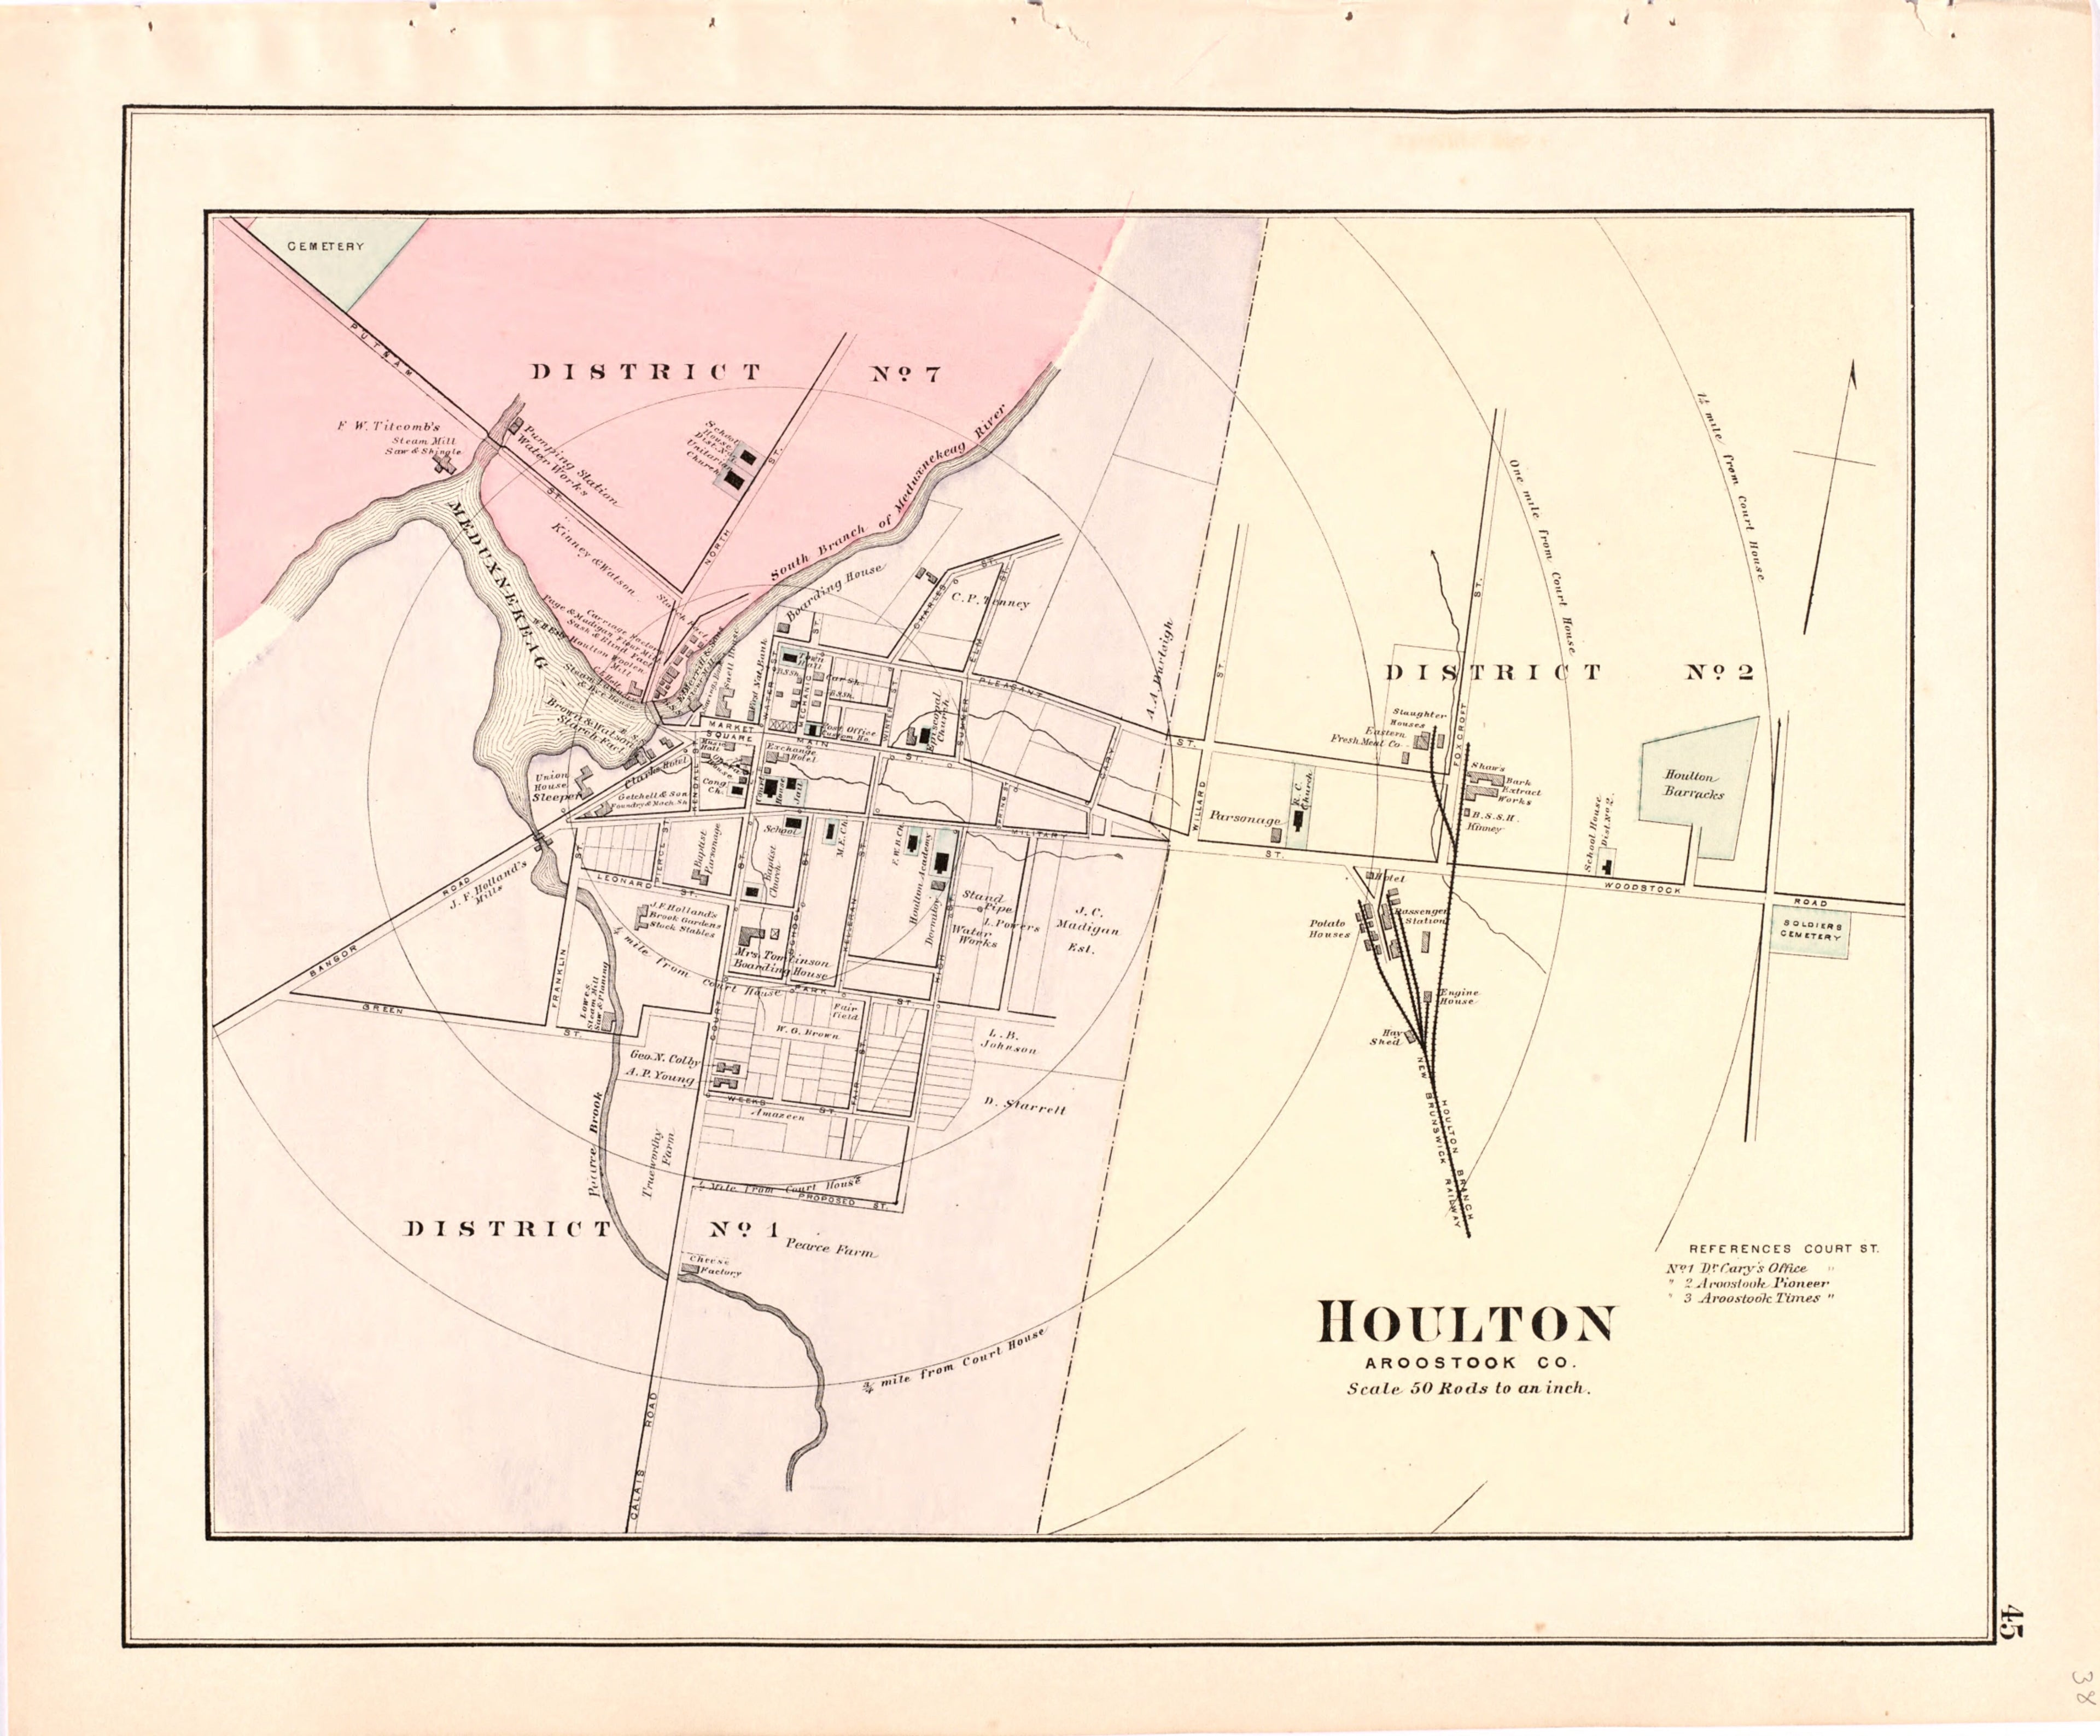 This hand drawn illustration (map) of Houlton from Colby&